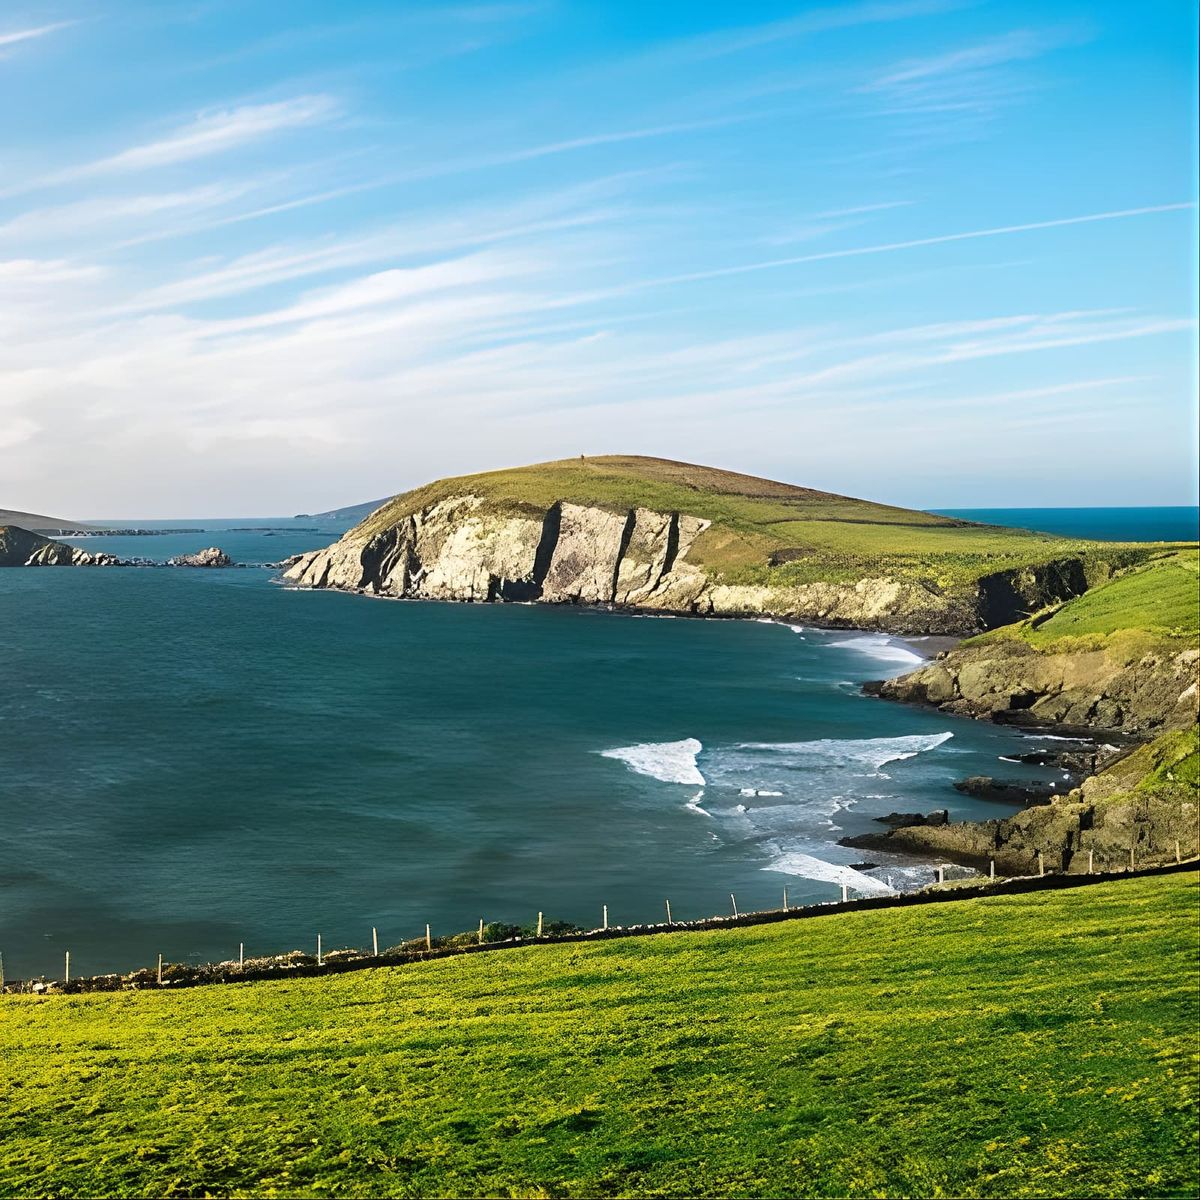 Dingle Peninsula Day Tour from Cork: Including The Wild Altanic Way